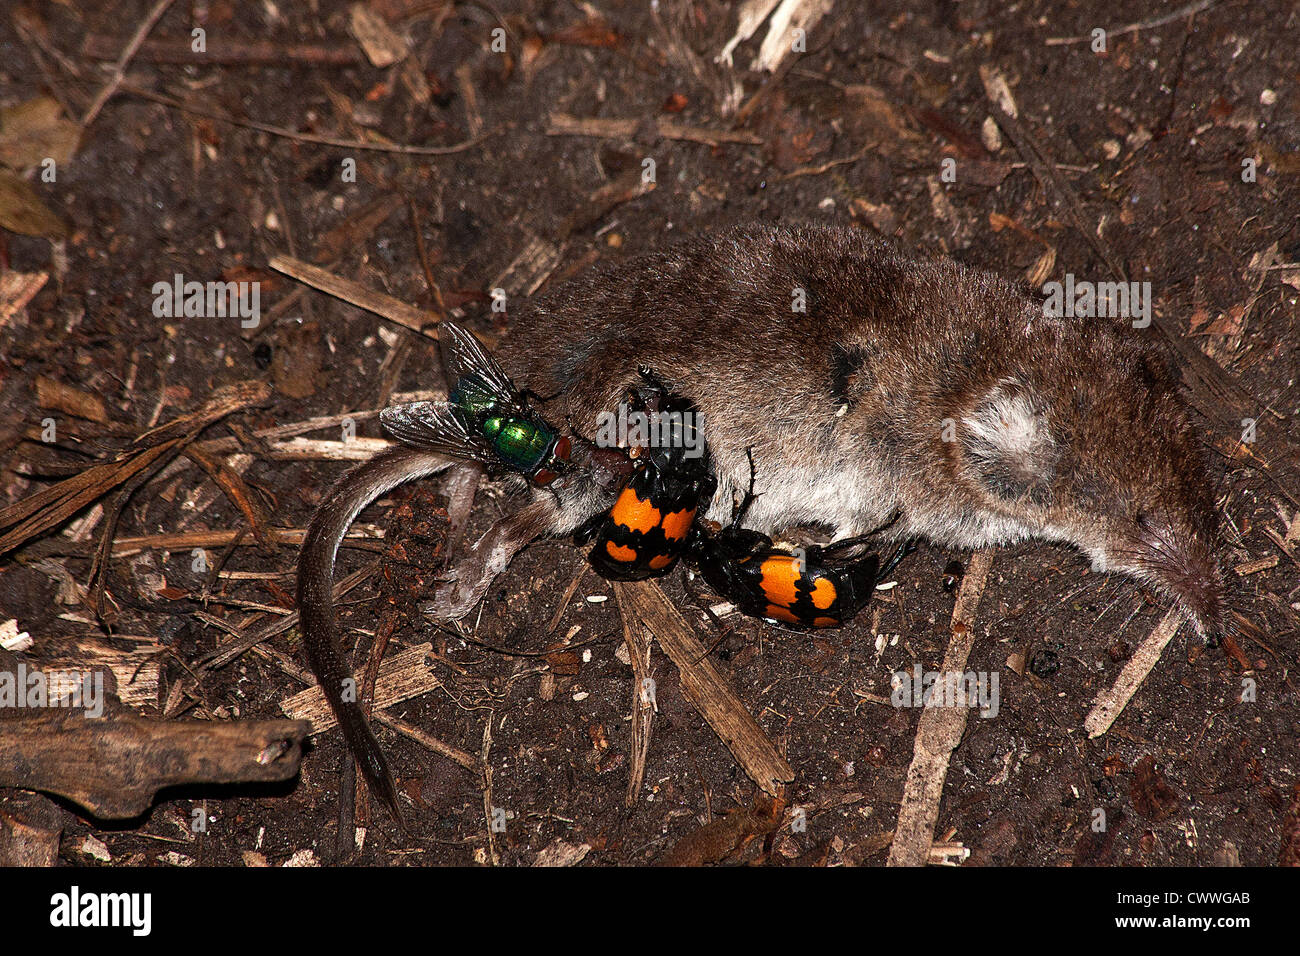 Sexton beetles and a green bottle on a Common Shrew Stock Photo